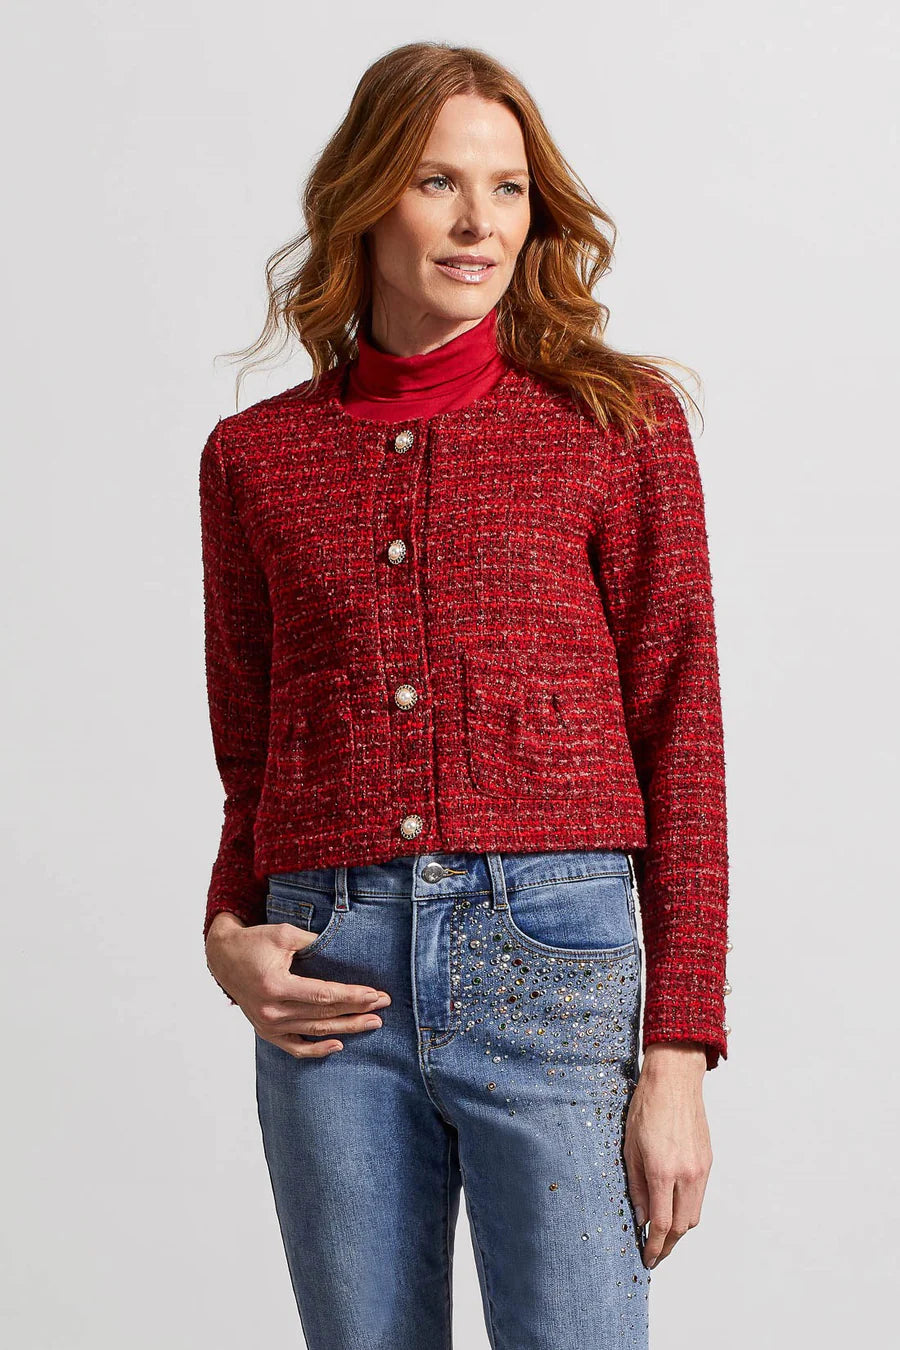 If timeless style is your cup of tea, you'll want to pour yourself right into this fancy tweed jacket. 